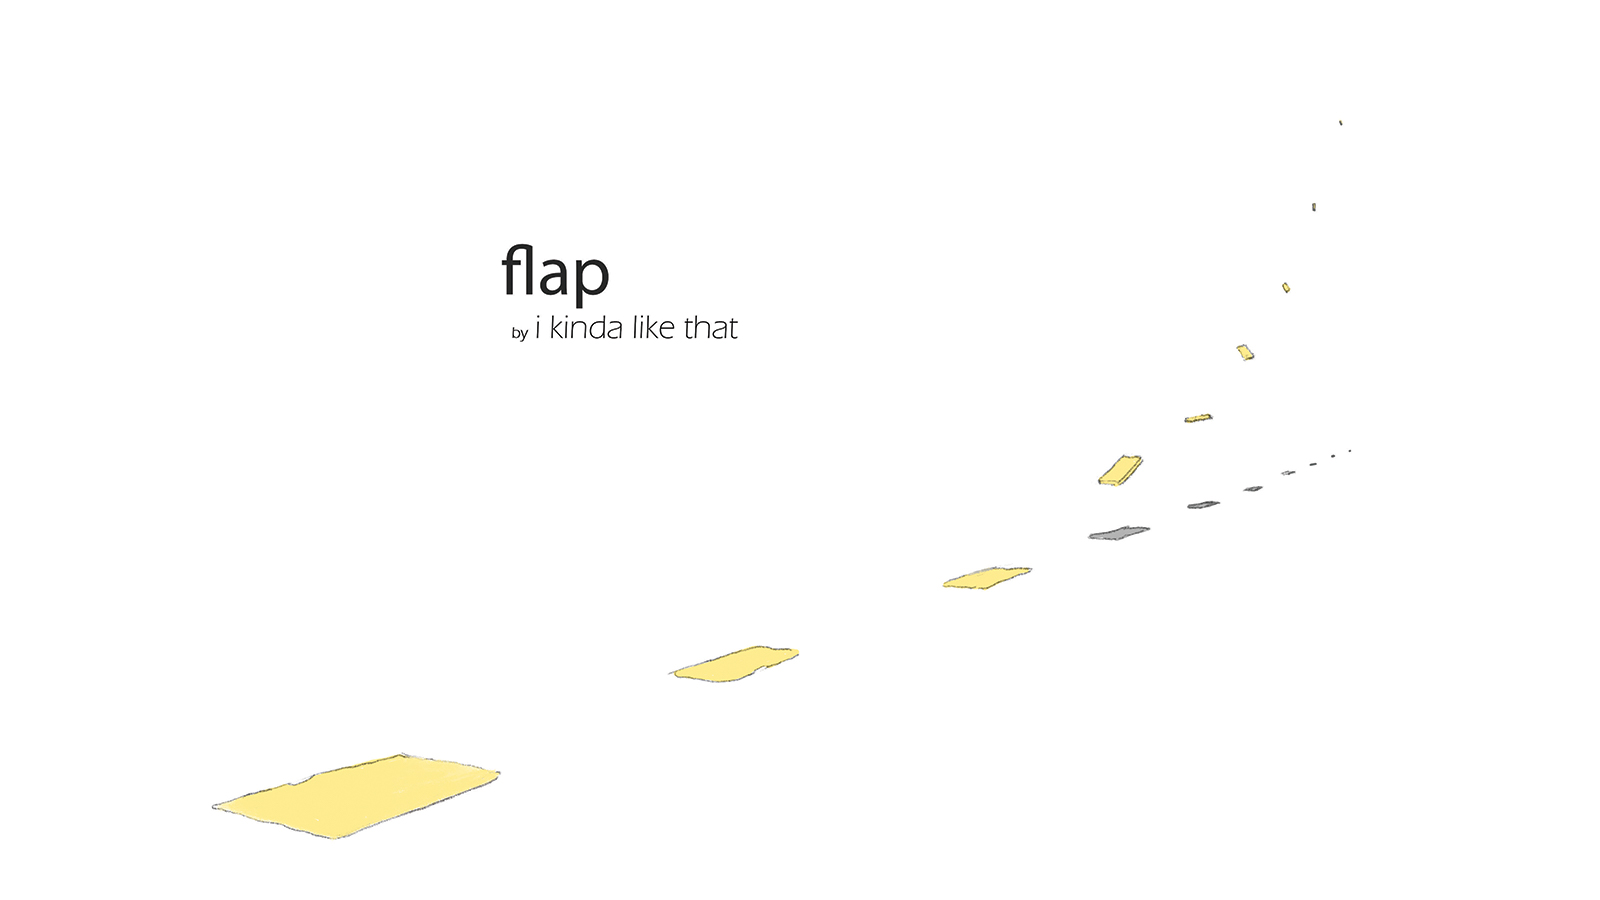 Title page for Flap by i kinda like that.